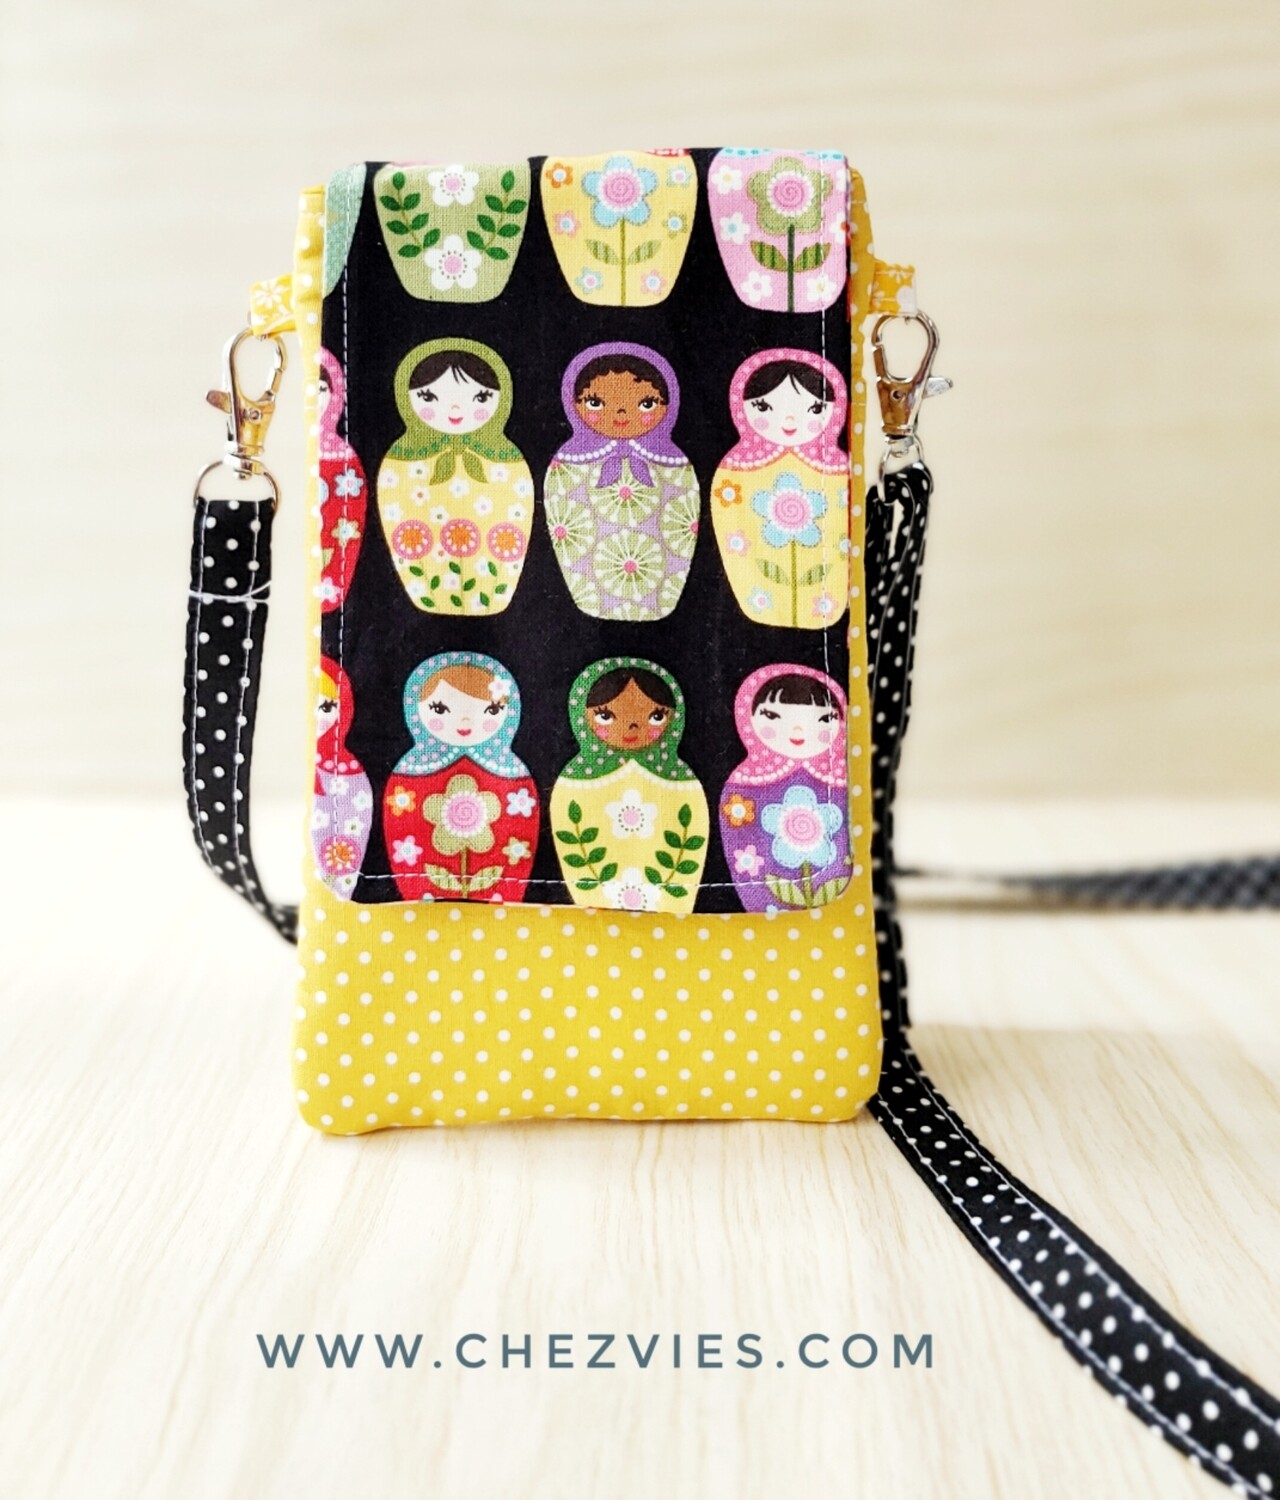 Handmade Mobile Phone Sling Bag, Russian Doll Phone Sleeve- Made to Order